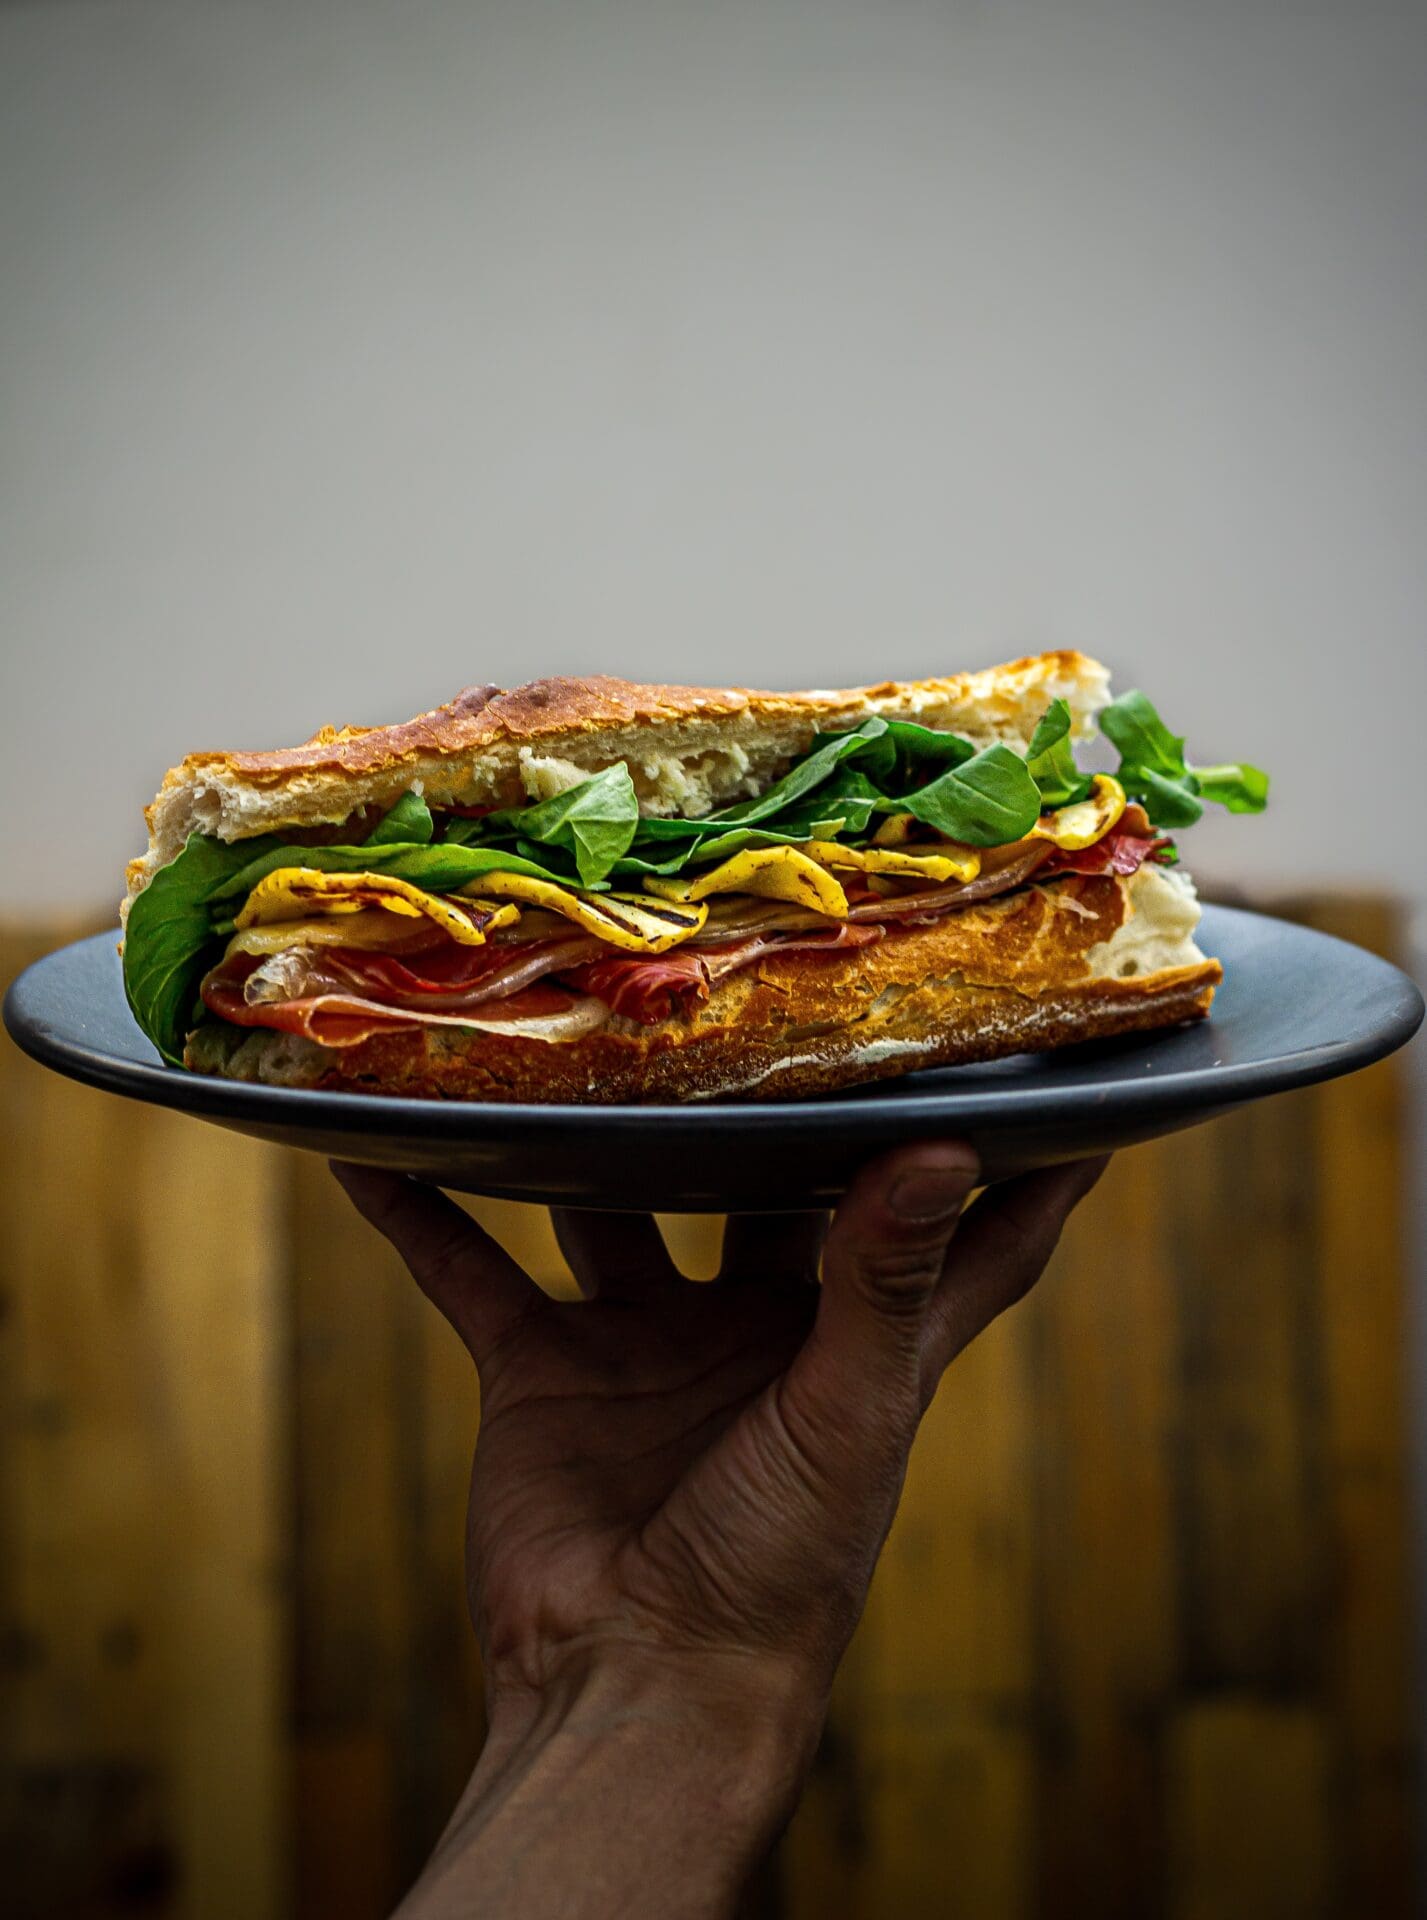 A local's guide to Mexico City | A hand holds a grey plate, on which rest a sandwich made with baguette, filled with cured meat and greens